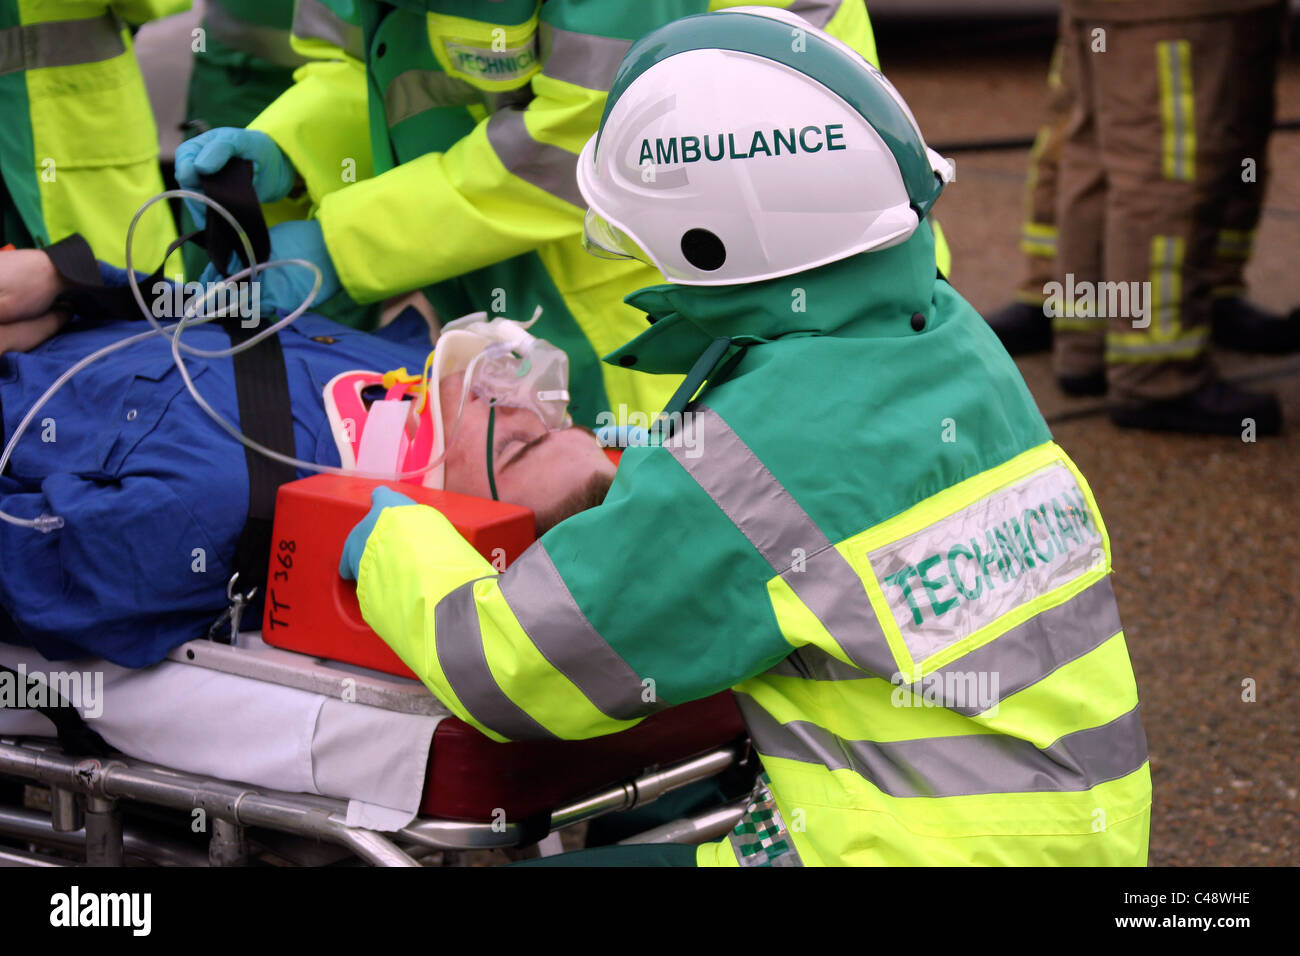 Ambulance crews protect a simulated casualty's neck during a training exercise. Stock Photo